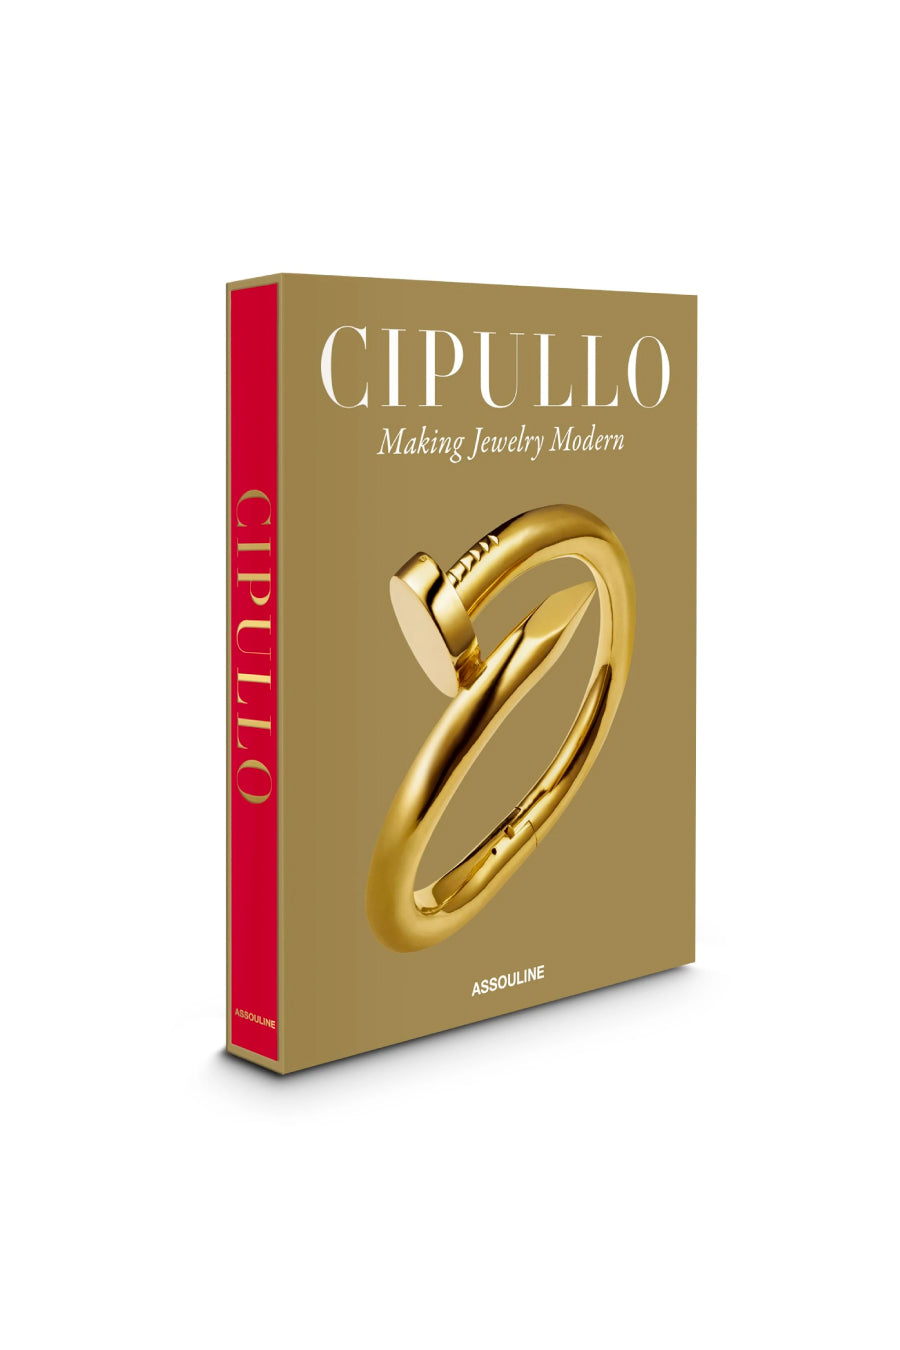 Assouline Cipullo: The Man Who Made Jewellery Modern